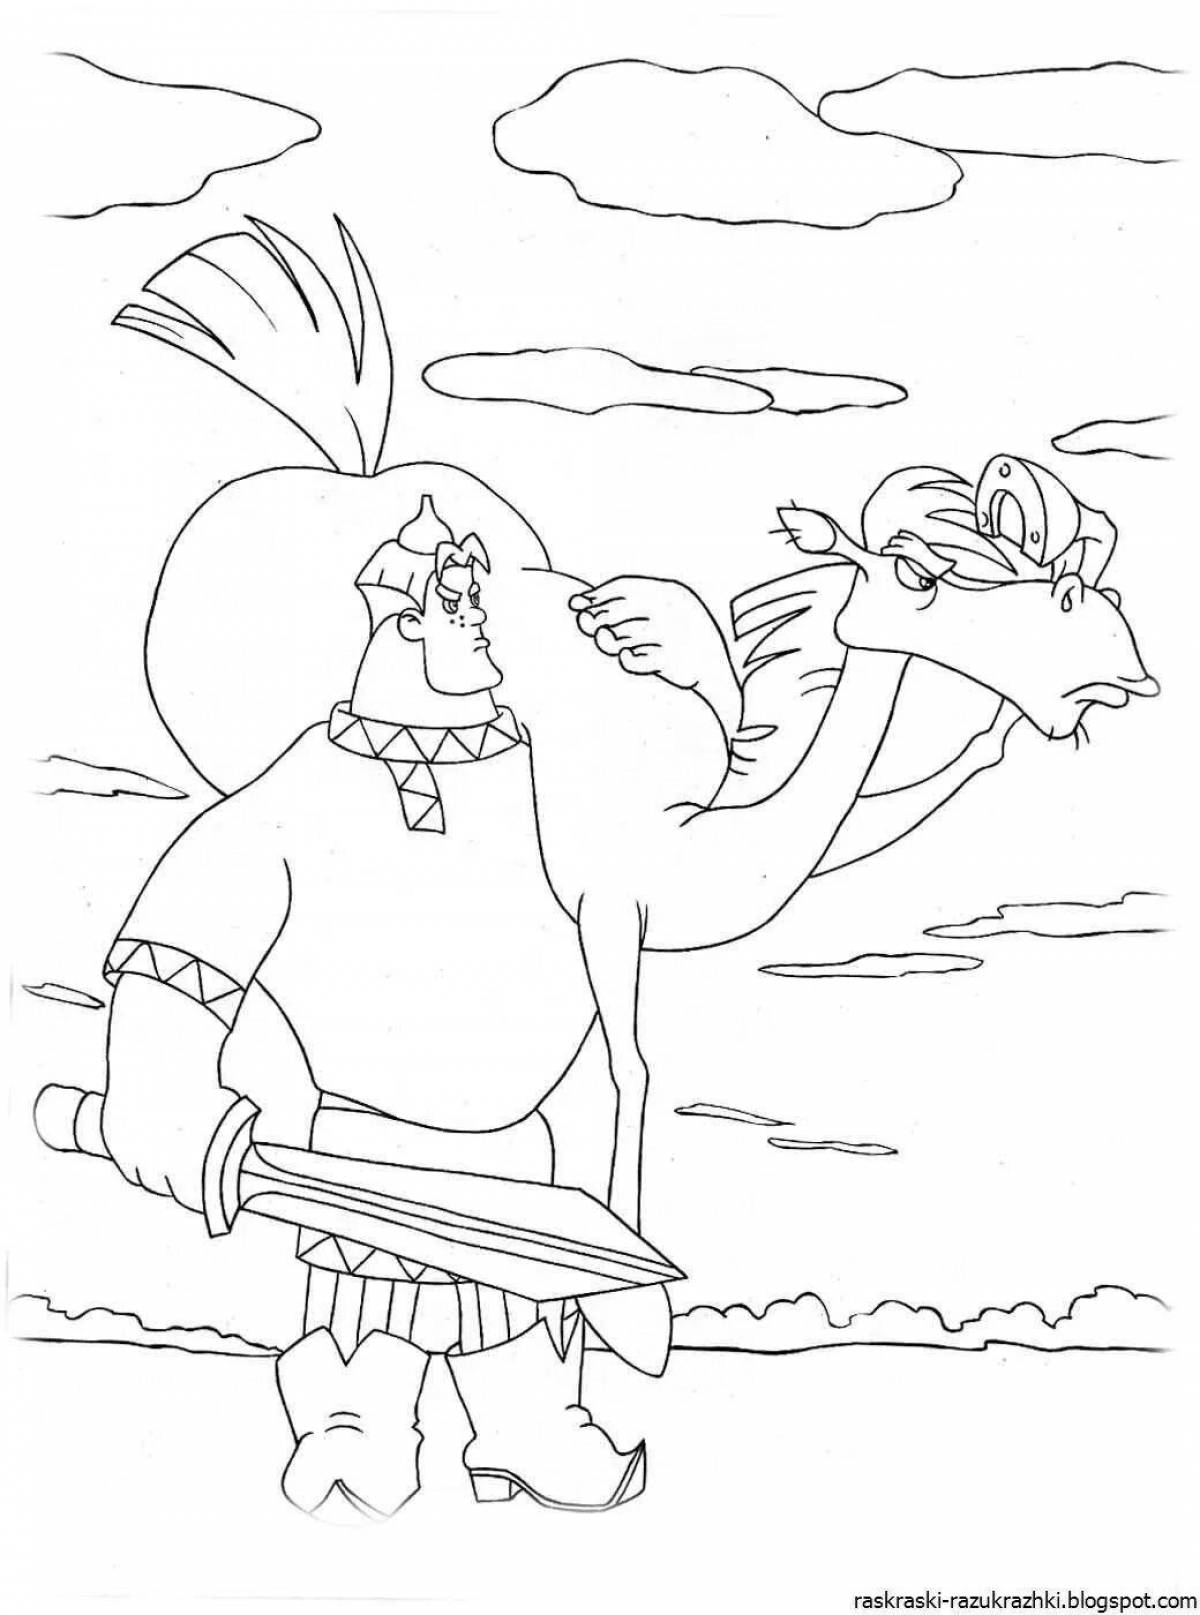 Coloring page brilliant move of the knight